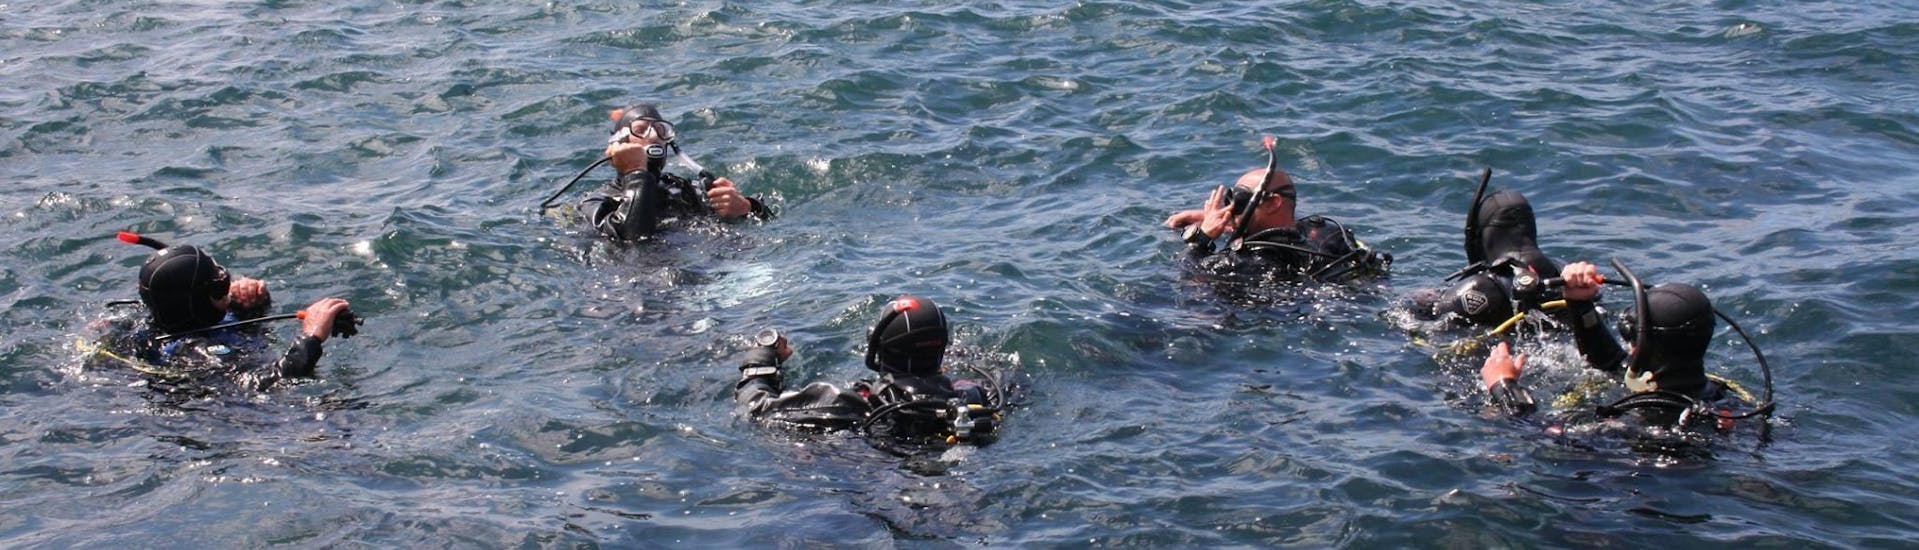 The participants of the Trial Scuba Diving for Beginners in Saint Paul's Bay with Octopus Garden Diving Centre in Malta are getting ready for their first dive.